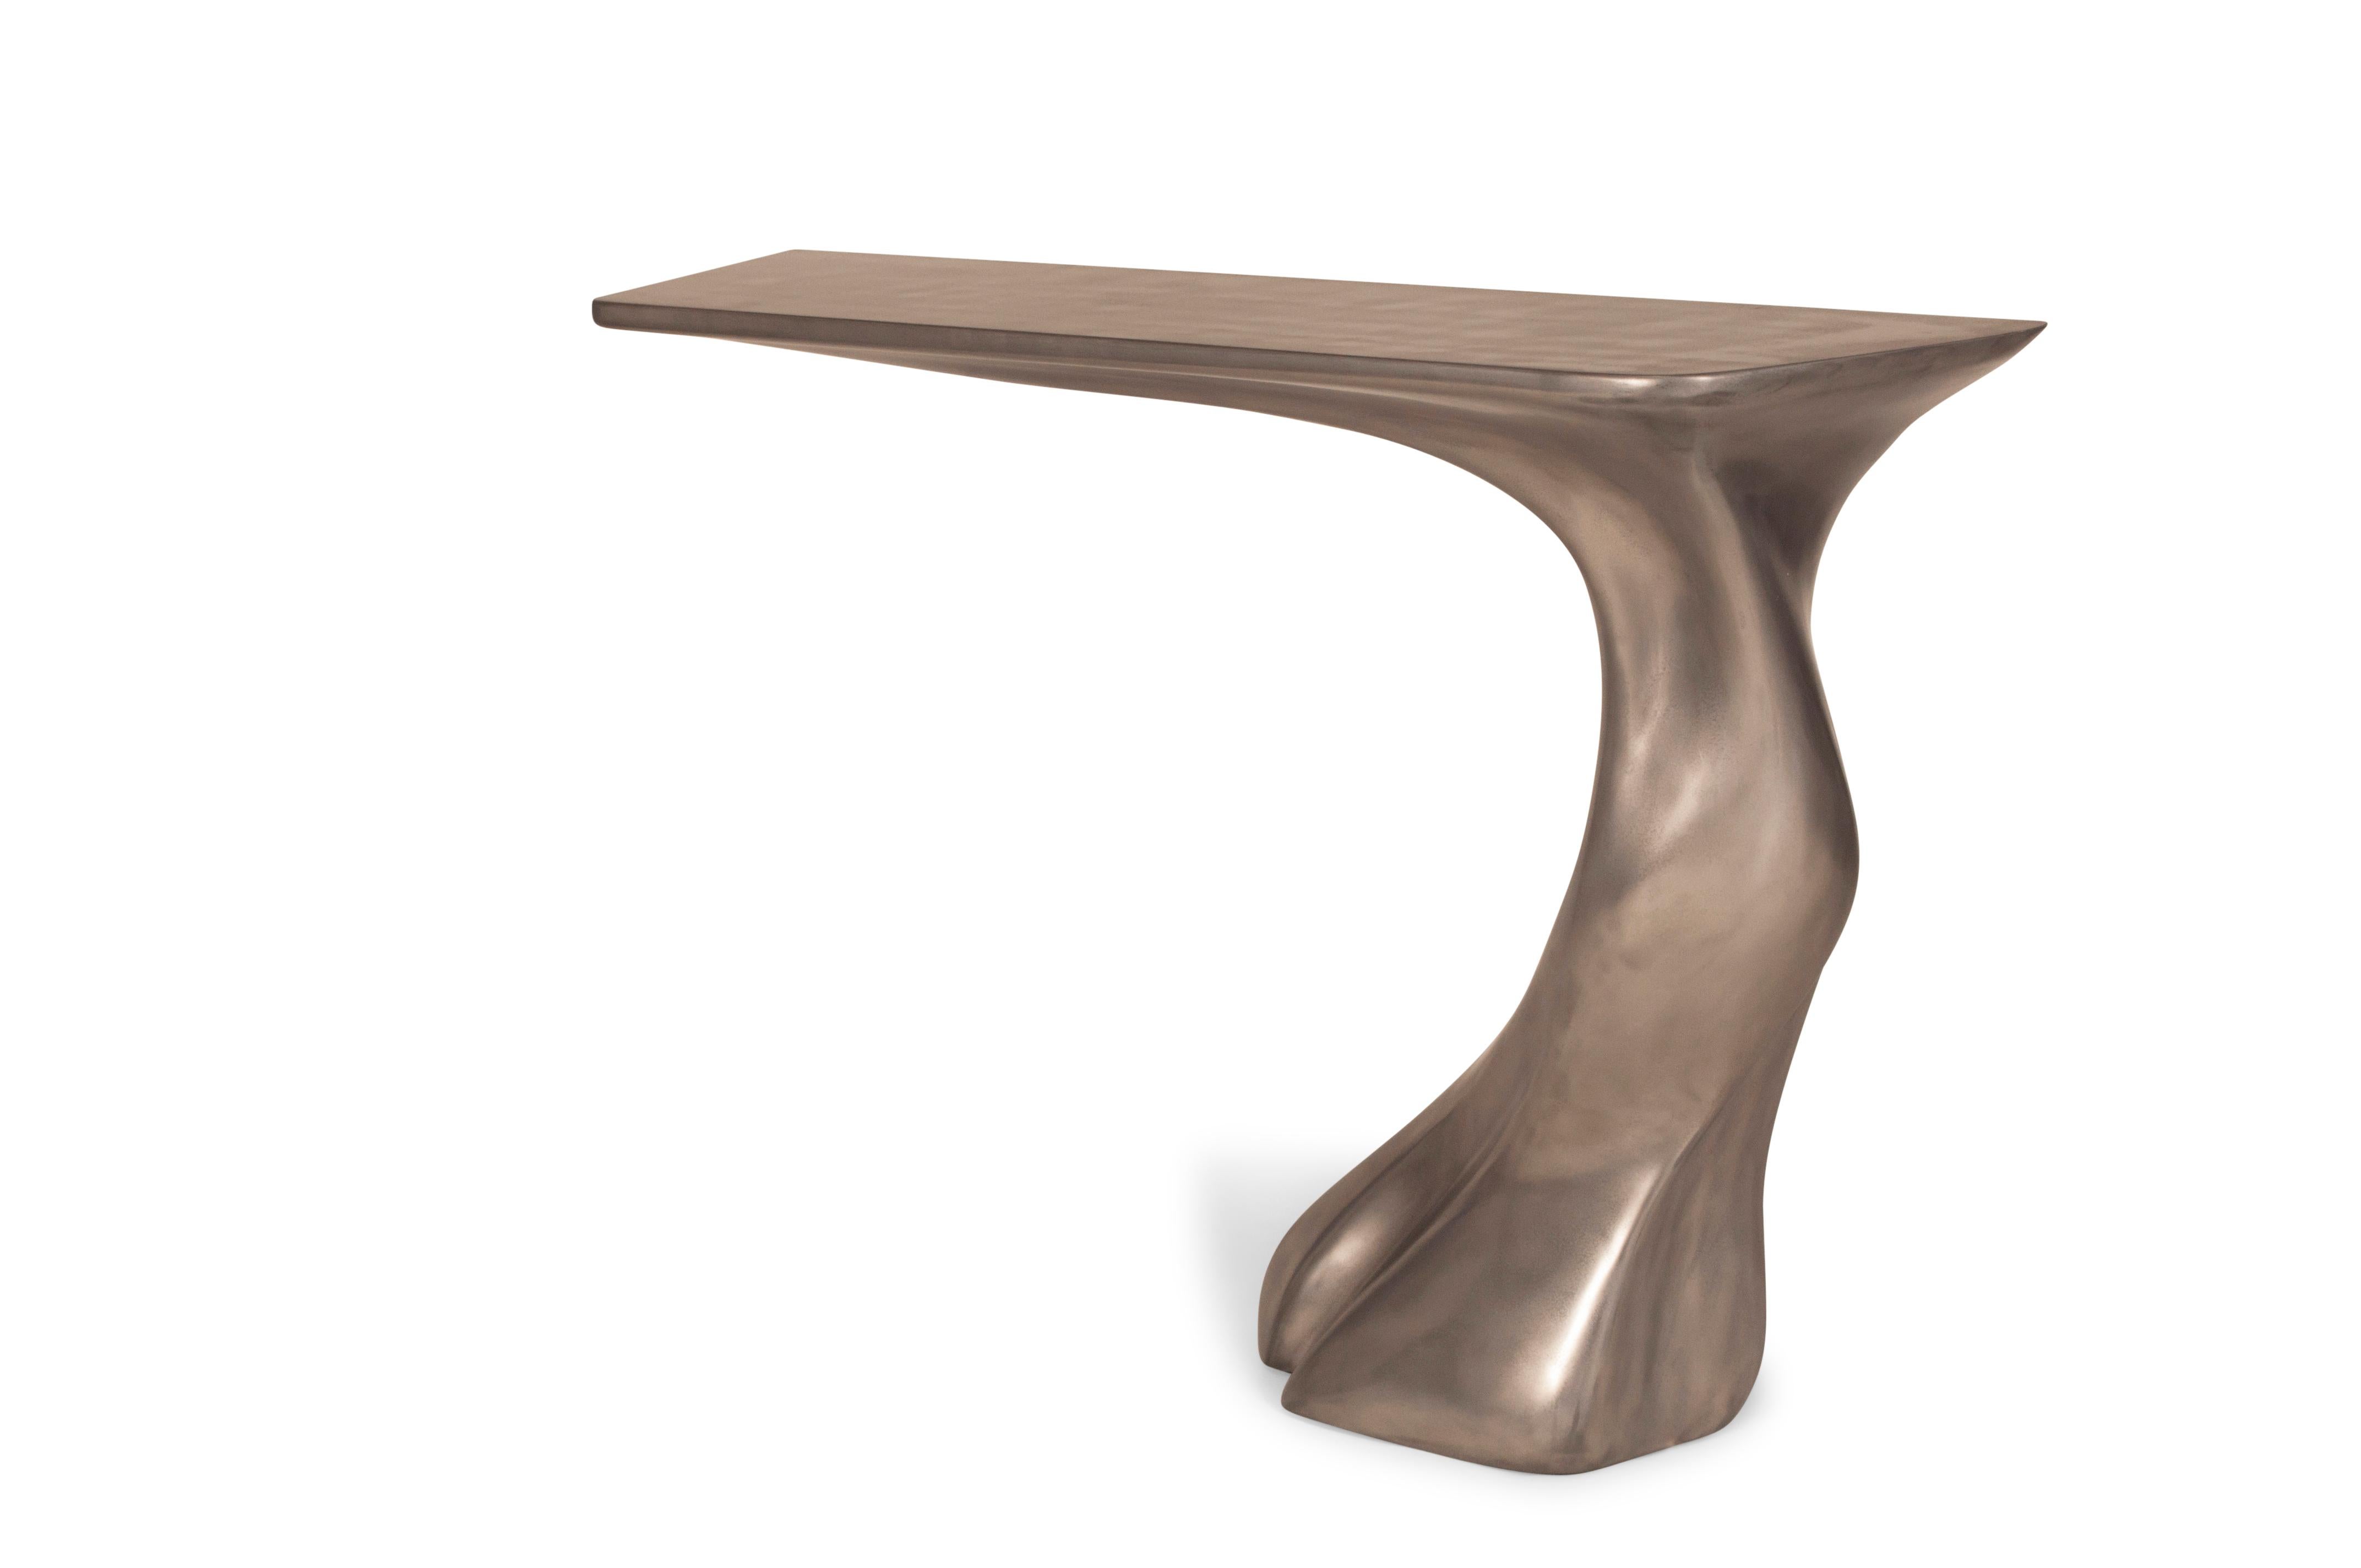 Frolic console table is a stylish futuristic sculptural art table with a dynamic form designed and manufactured by Amorph. Frolic console table is made out of wood with white matte lacquer finish. By the nature, the ashwood grain’s look would be